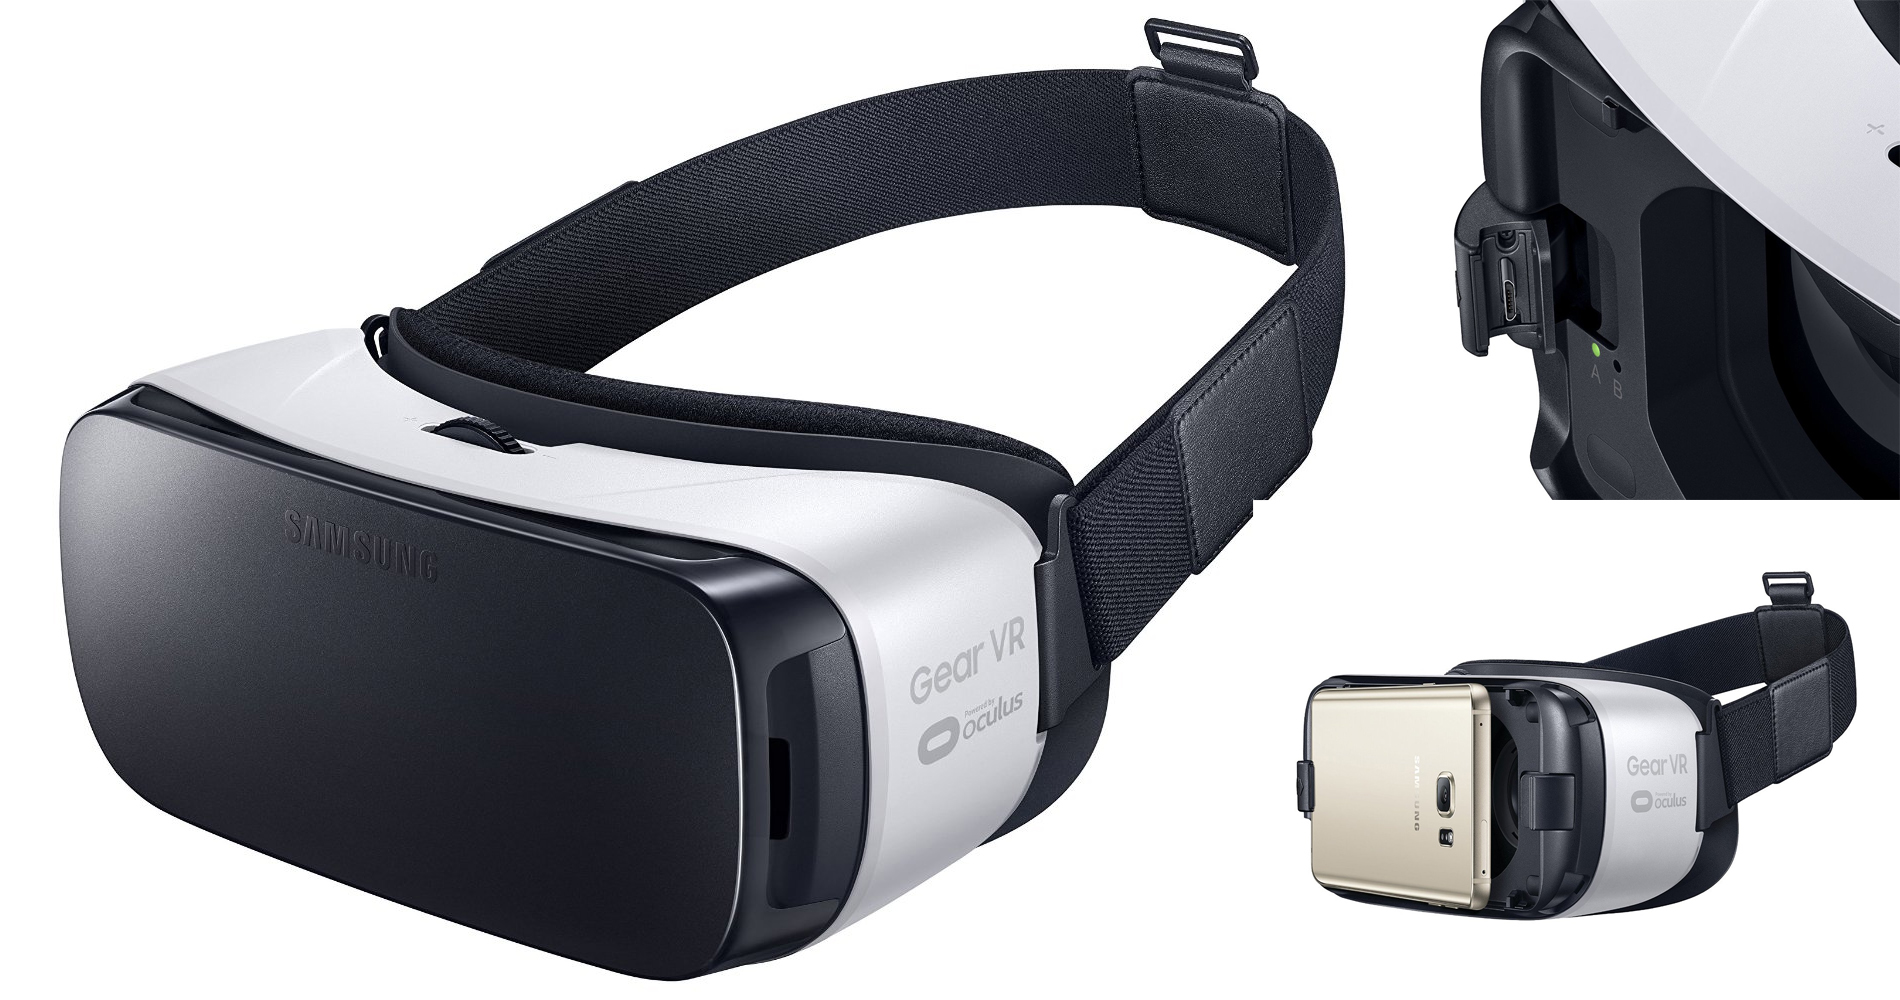 Samsung Gear VR - Virtual Reality Headset fathers day gift ideas 2016